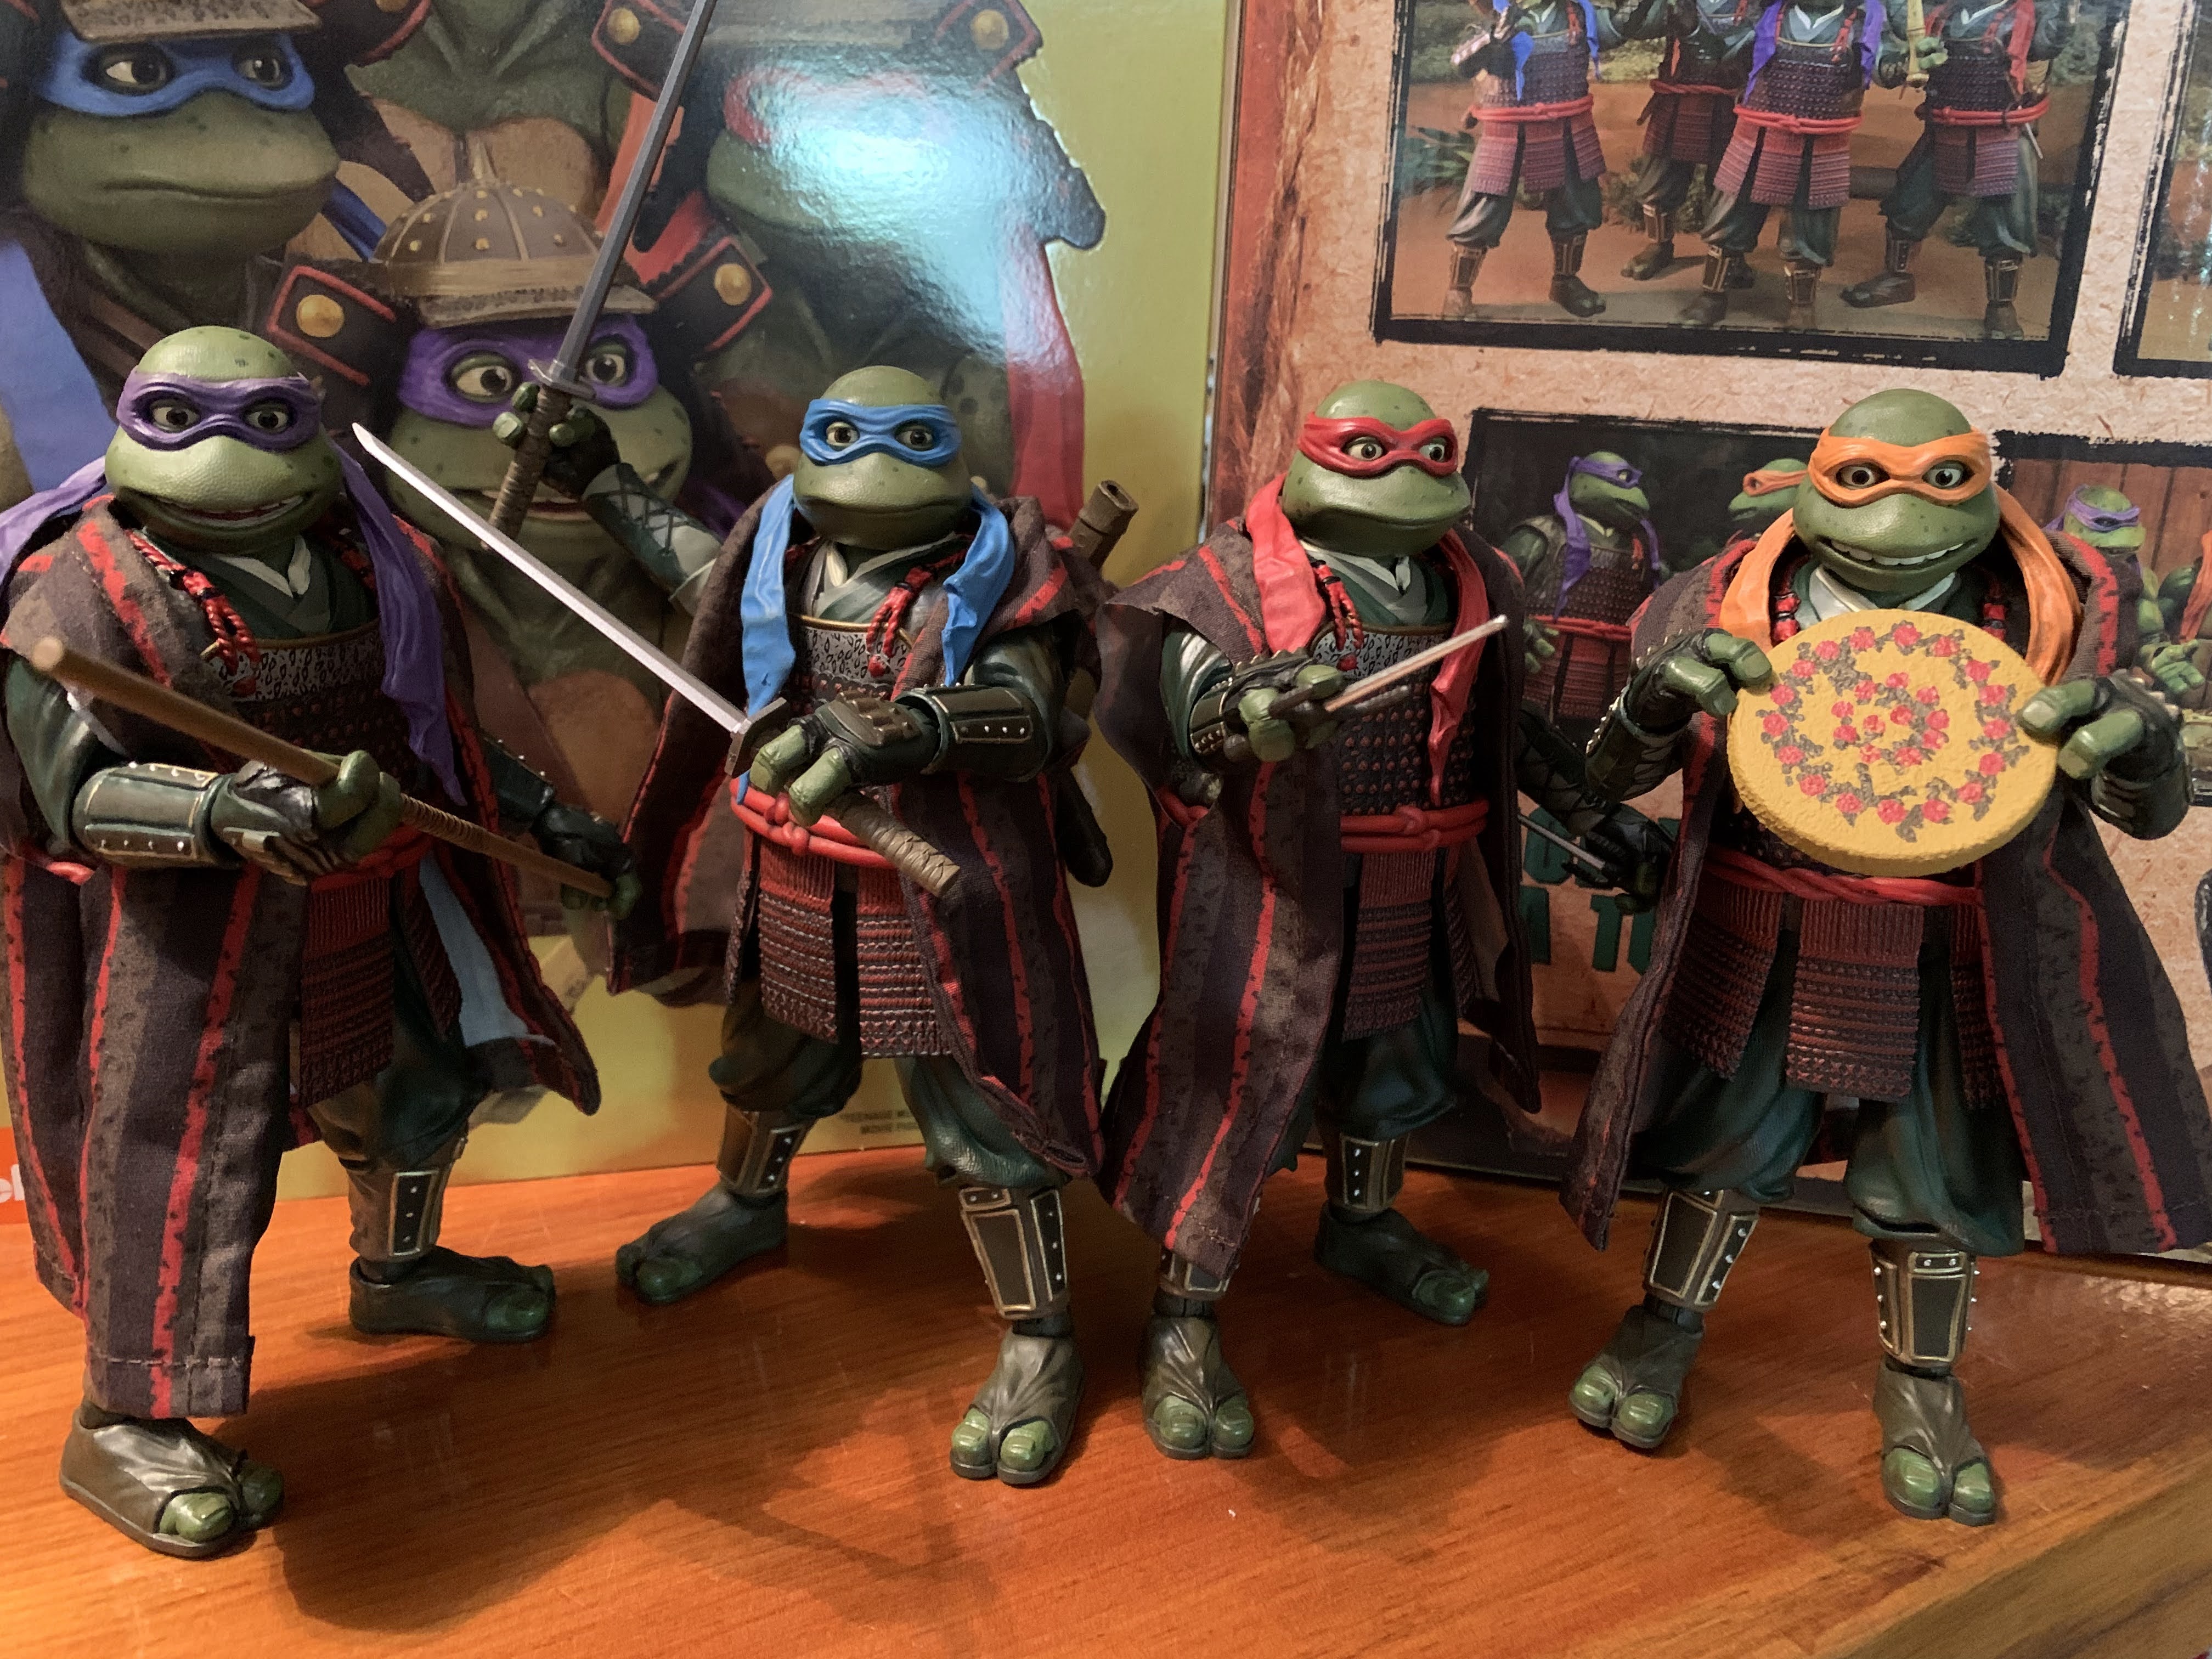 Every Canceled TMNT Movie (& Why They Didn't Happen)